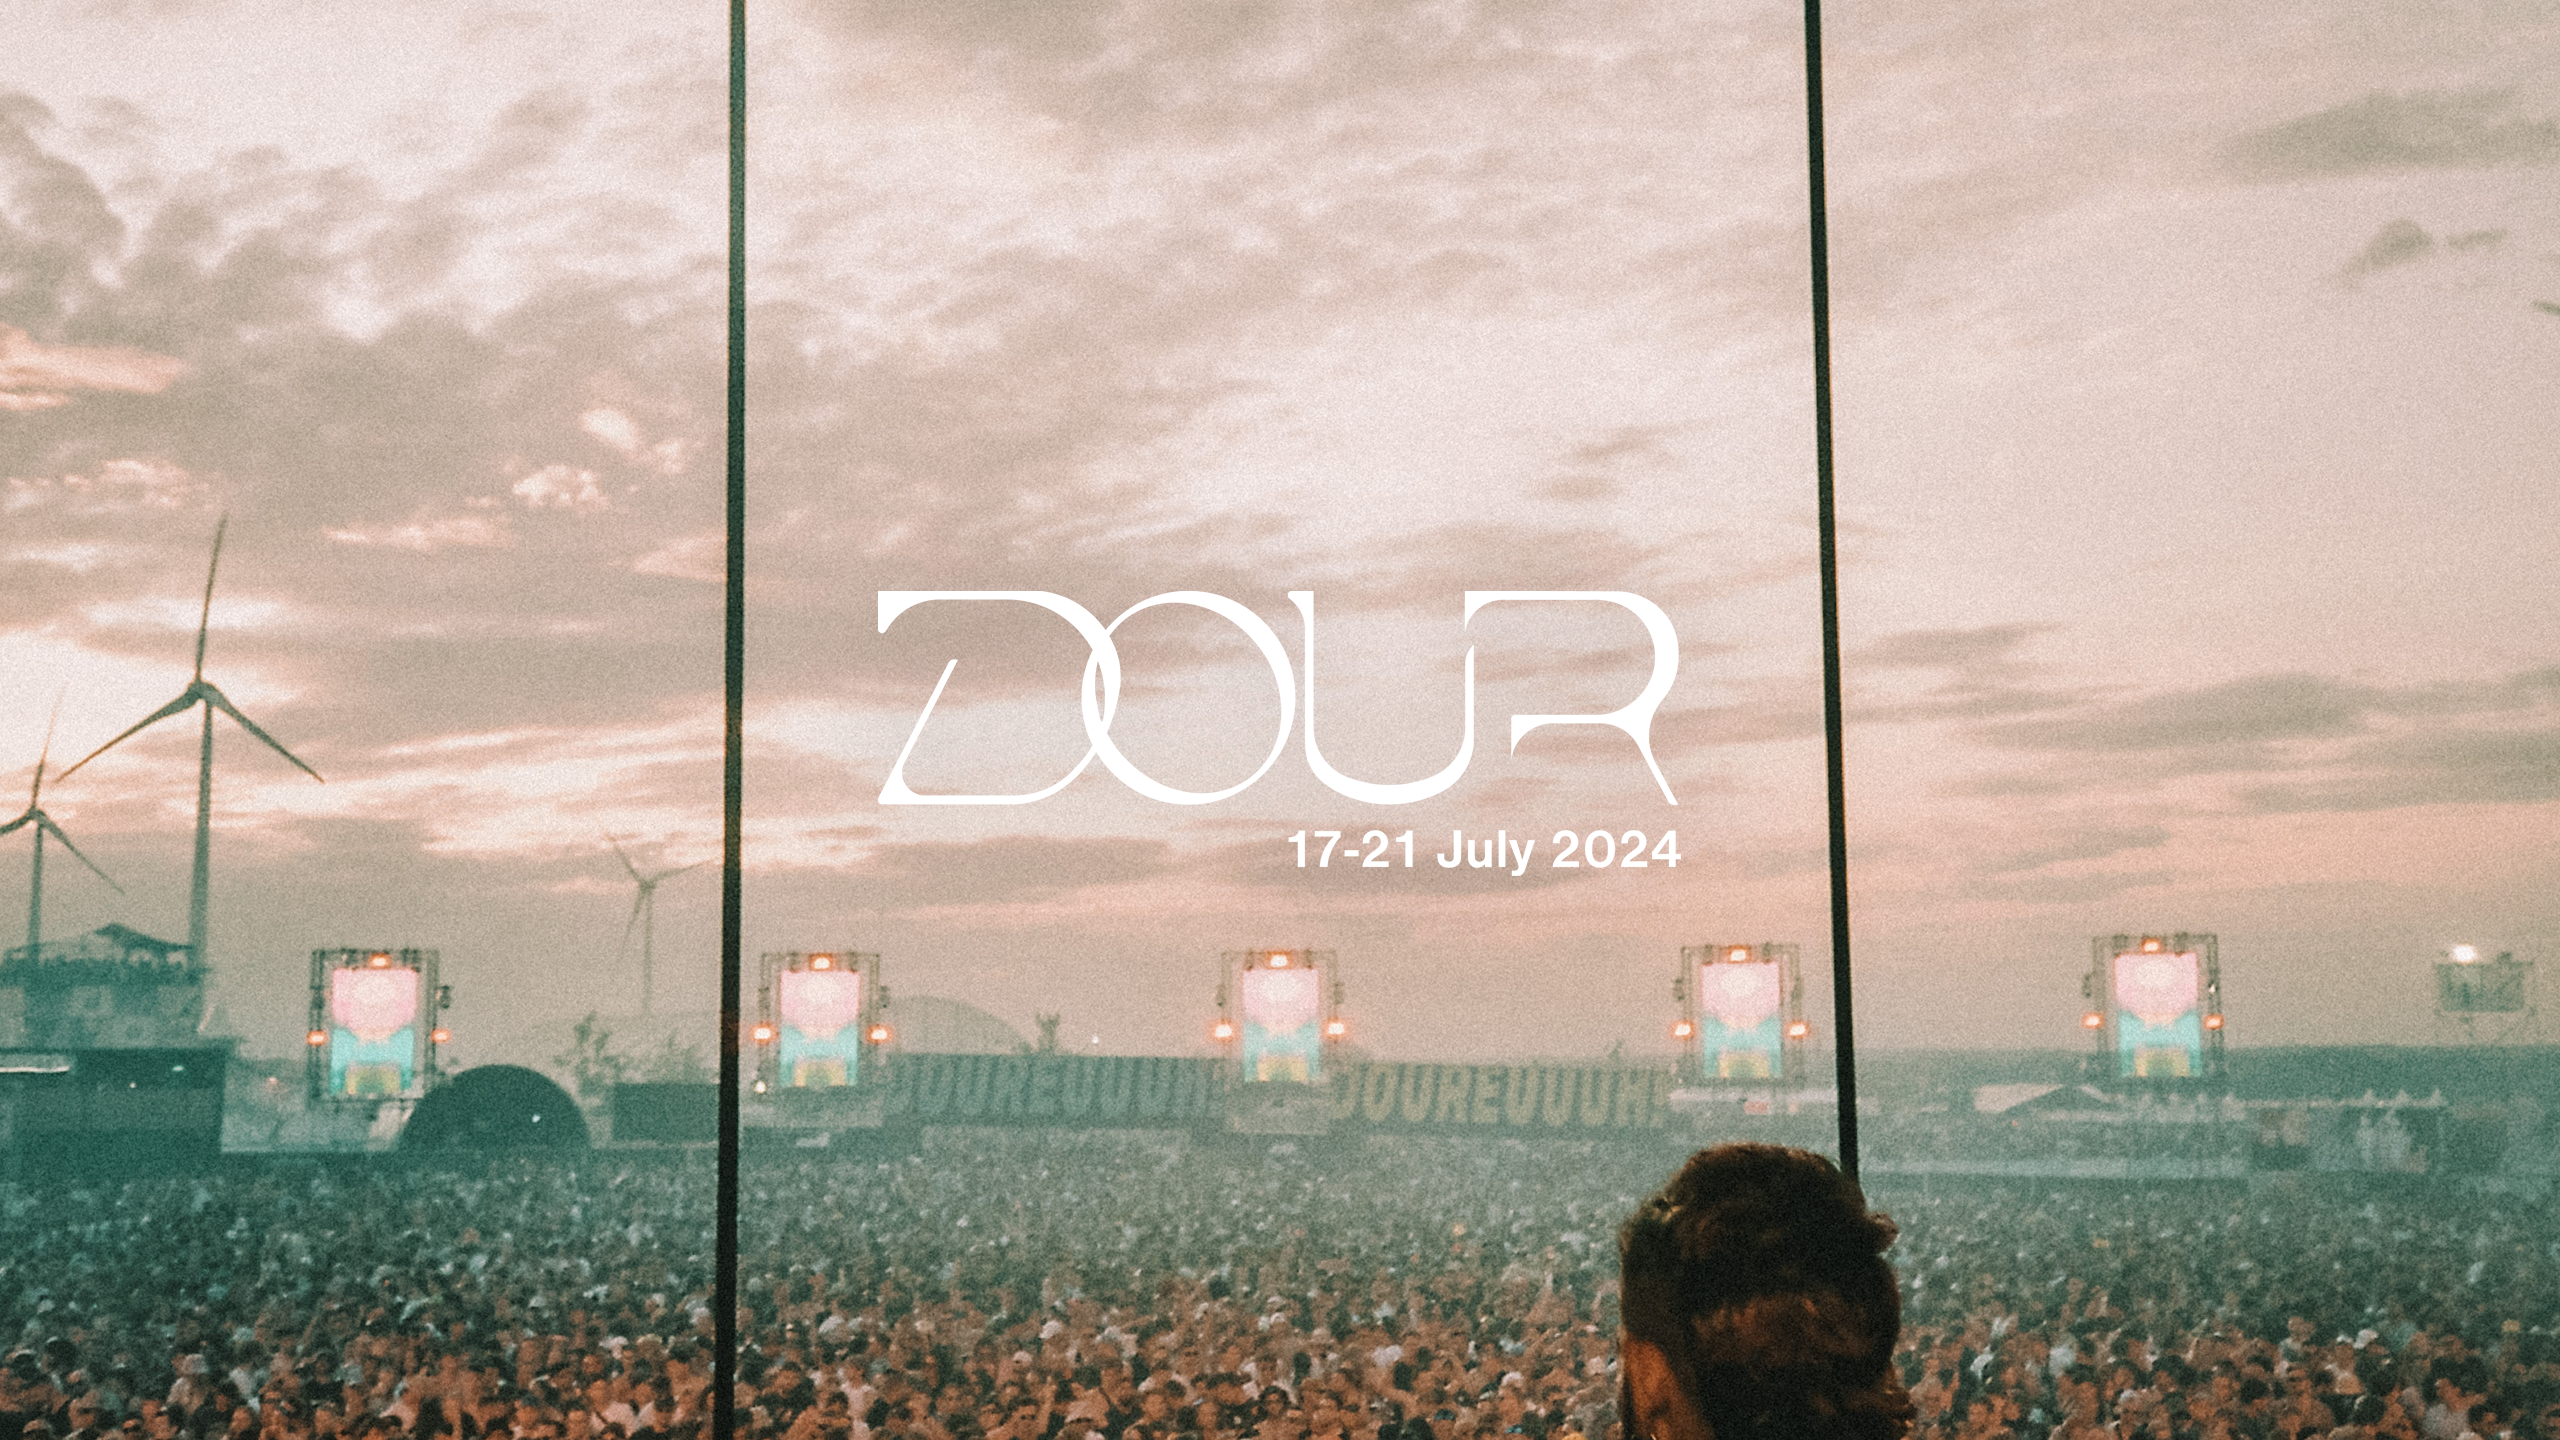 Dour Festival 2024 - Day 5 - フライヤー表